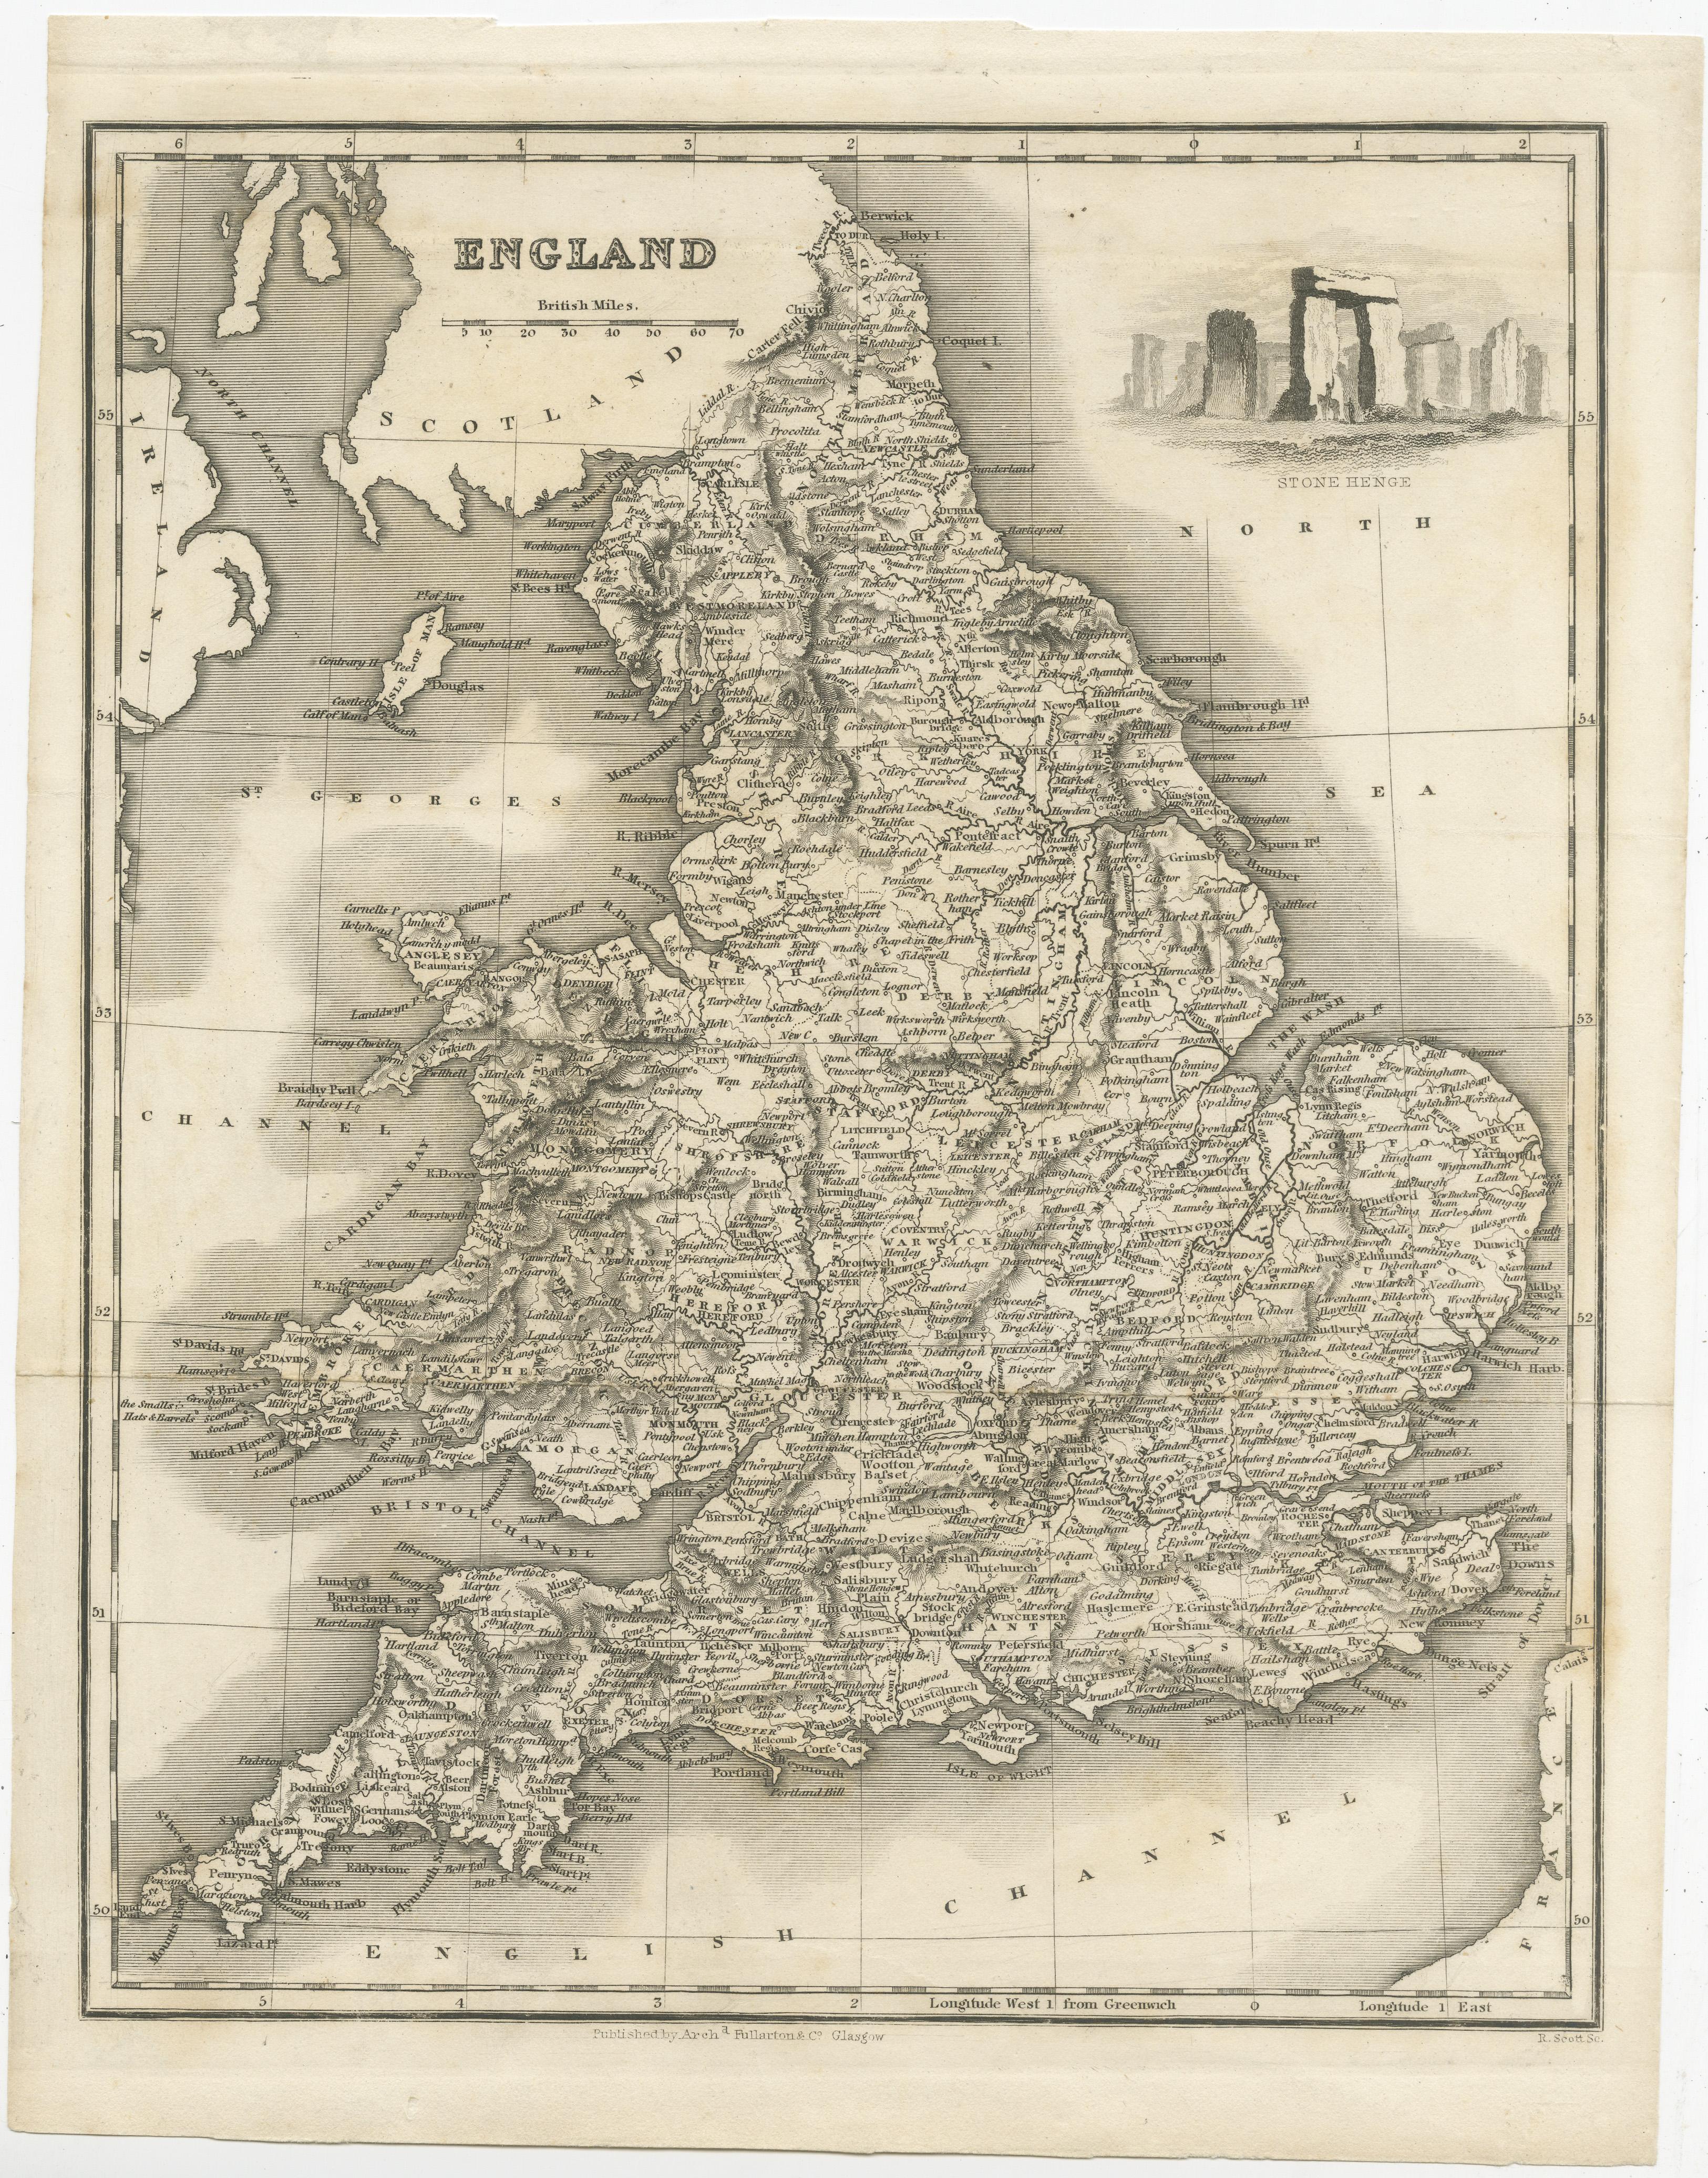 Antique map titled 'England'. Original antique map of England, with decorative vignette of stonehenge. Engraved by R. Scott. Published by Fullarton, circa 1835.